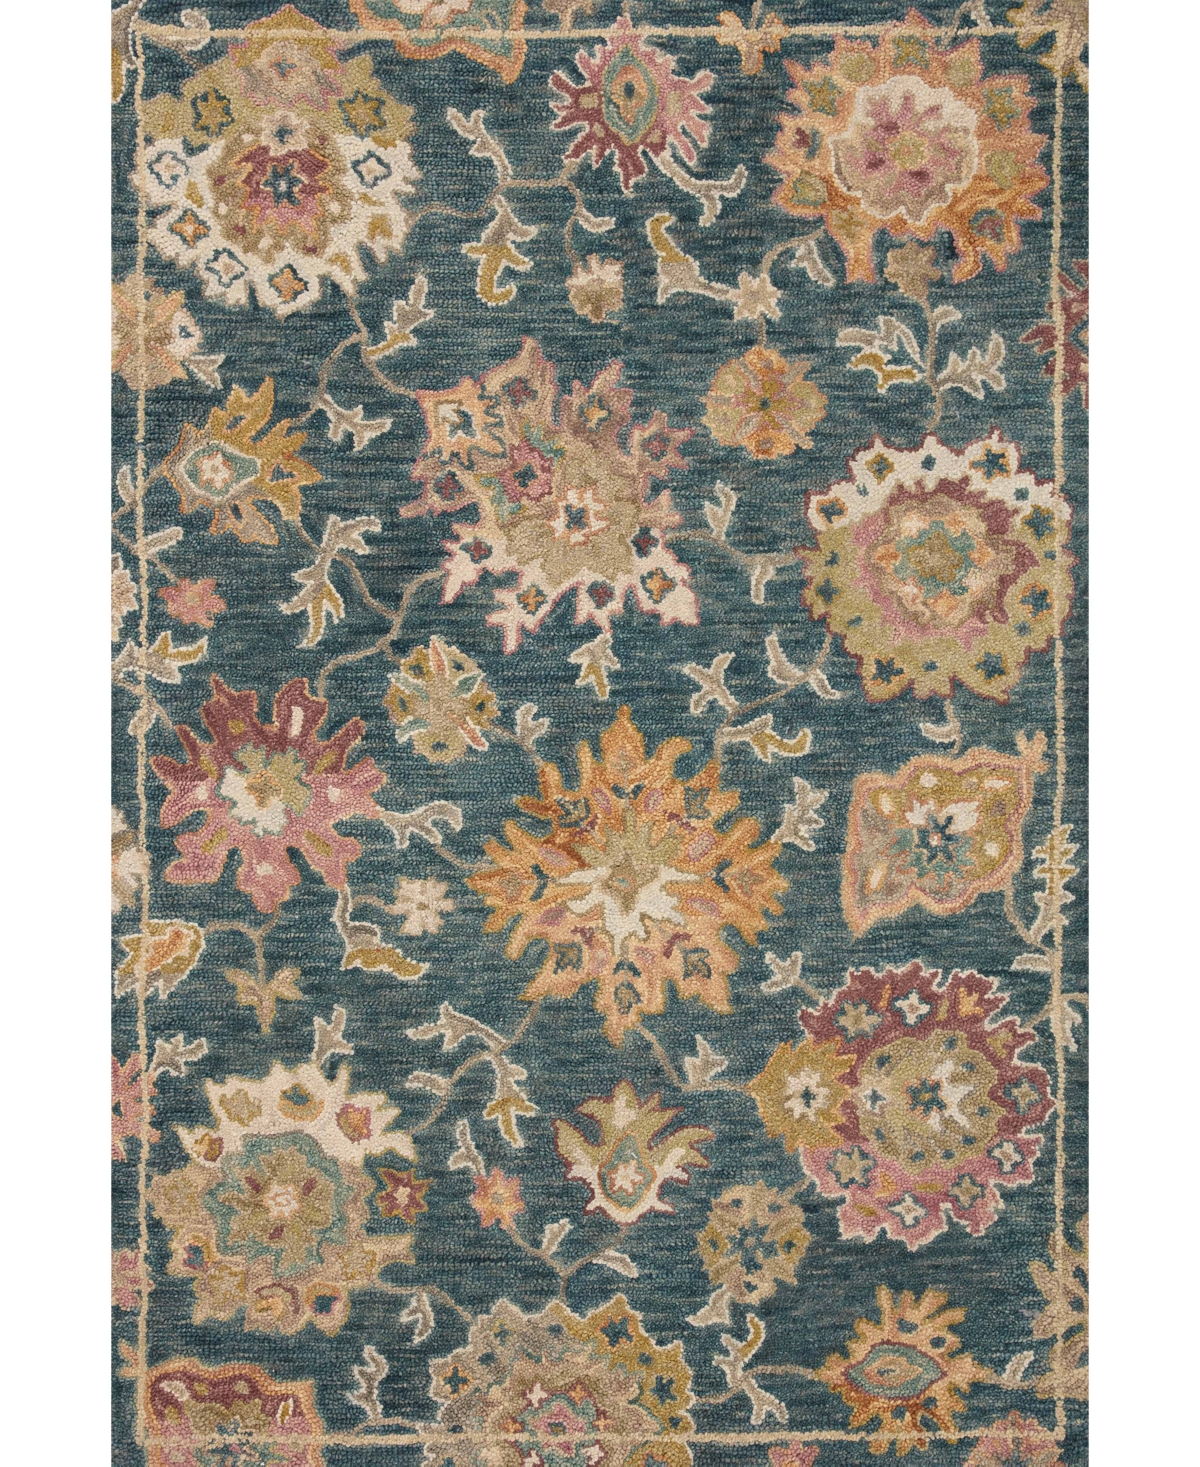 Spring Valley Home Lotus Lts-03 2' X 5' Area Rug In Navy/multi